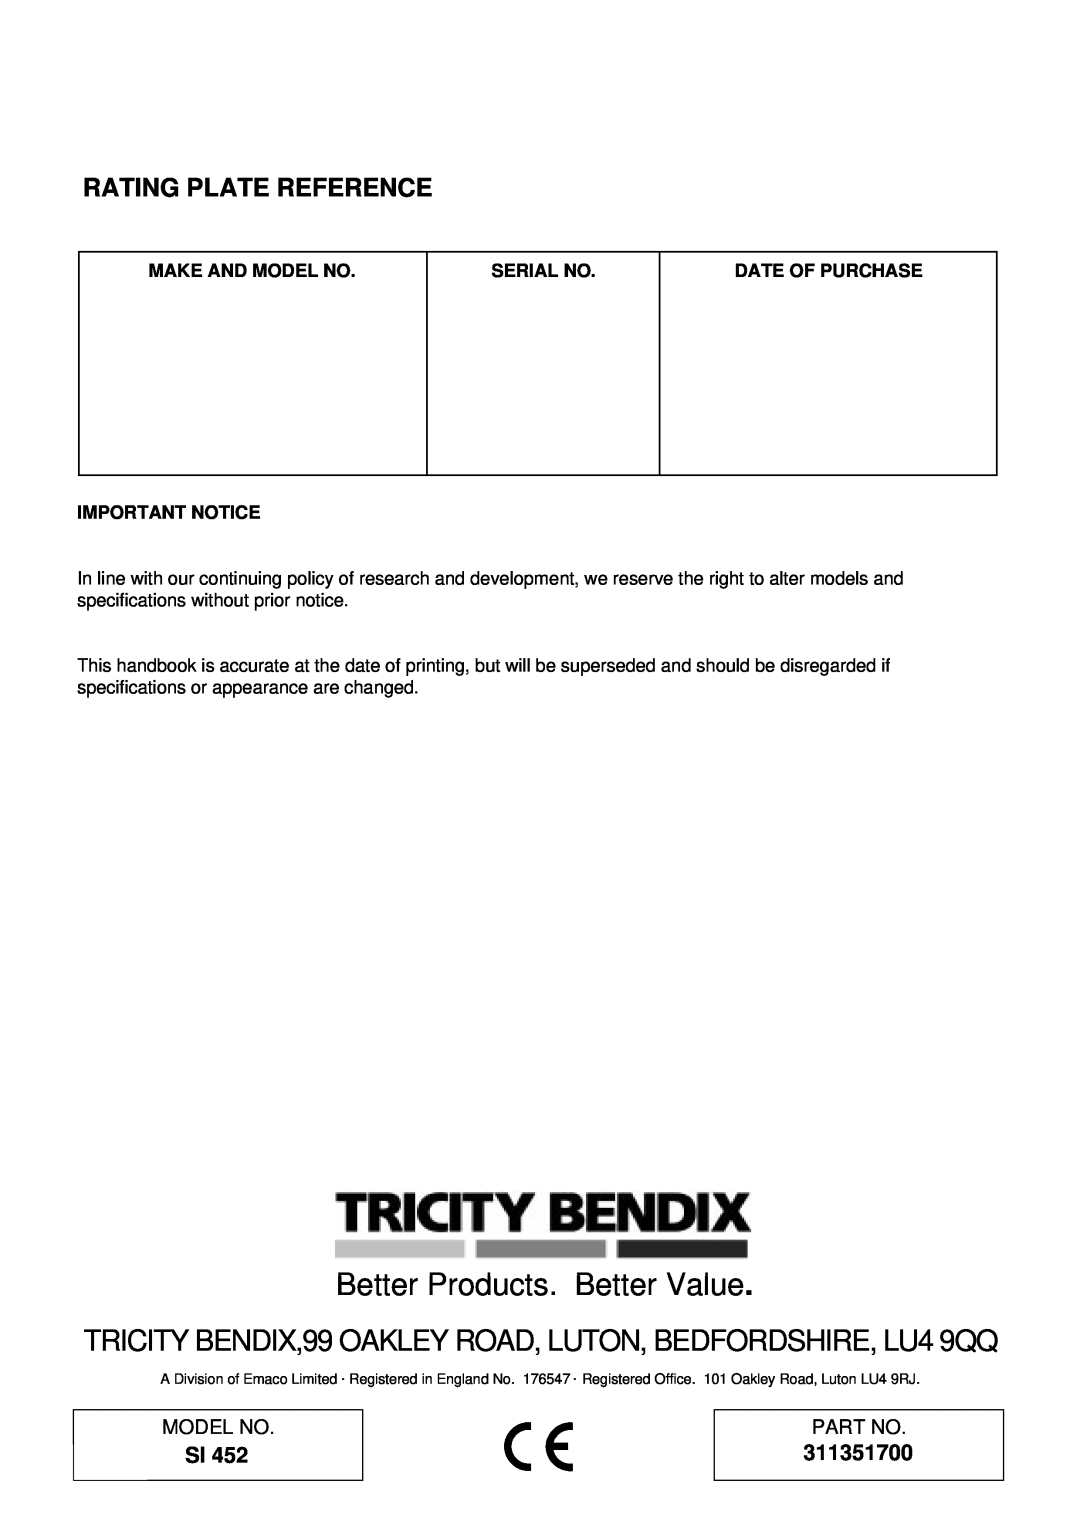 Tricity Bendix SI 452 Rating Plate Reference, 311351700, Better Products. Better Value, Make And Model No, Serial No 